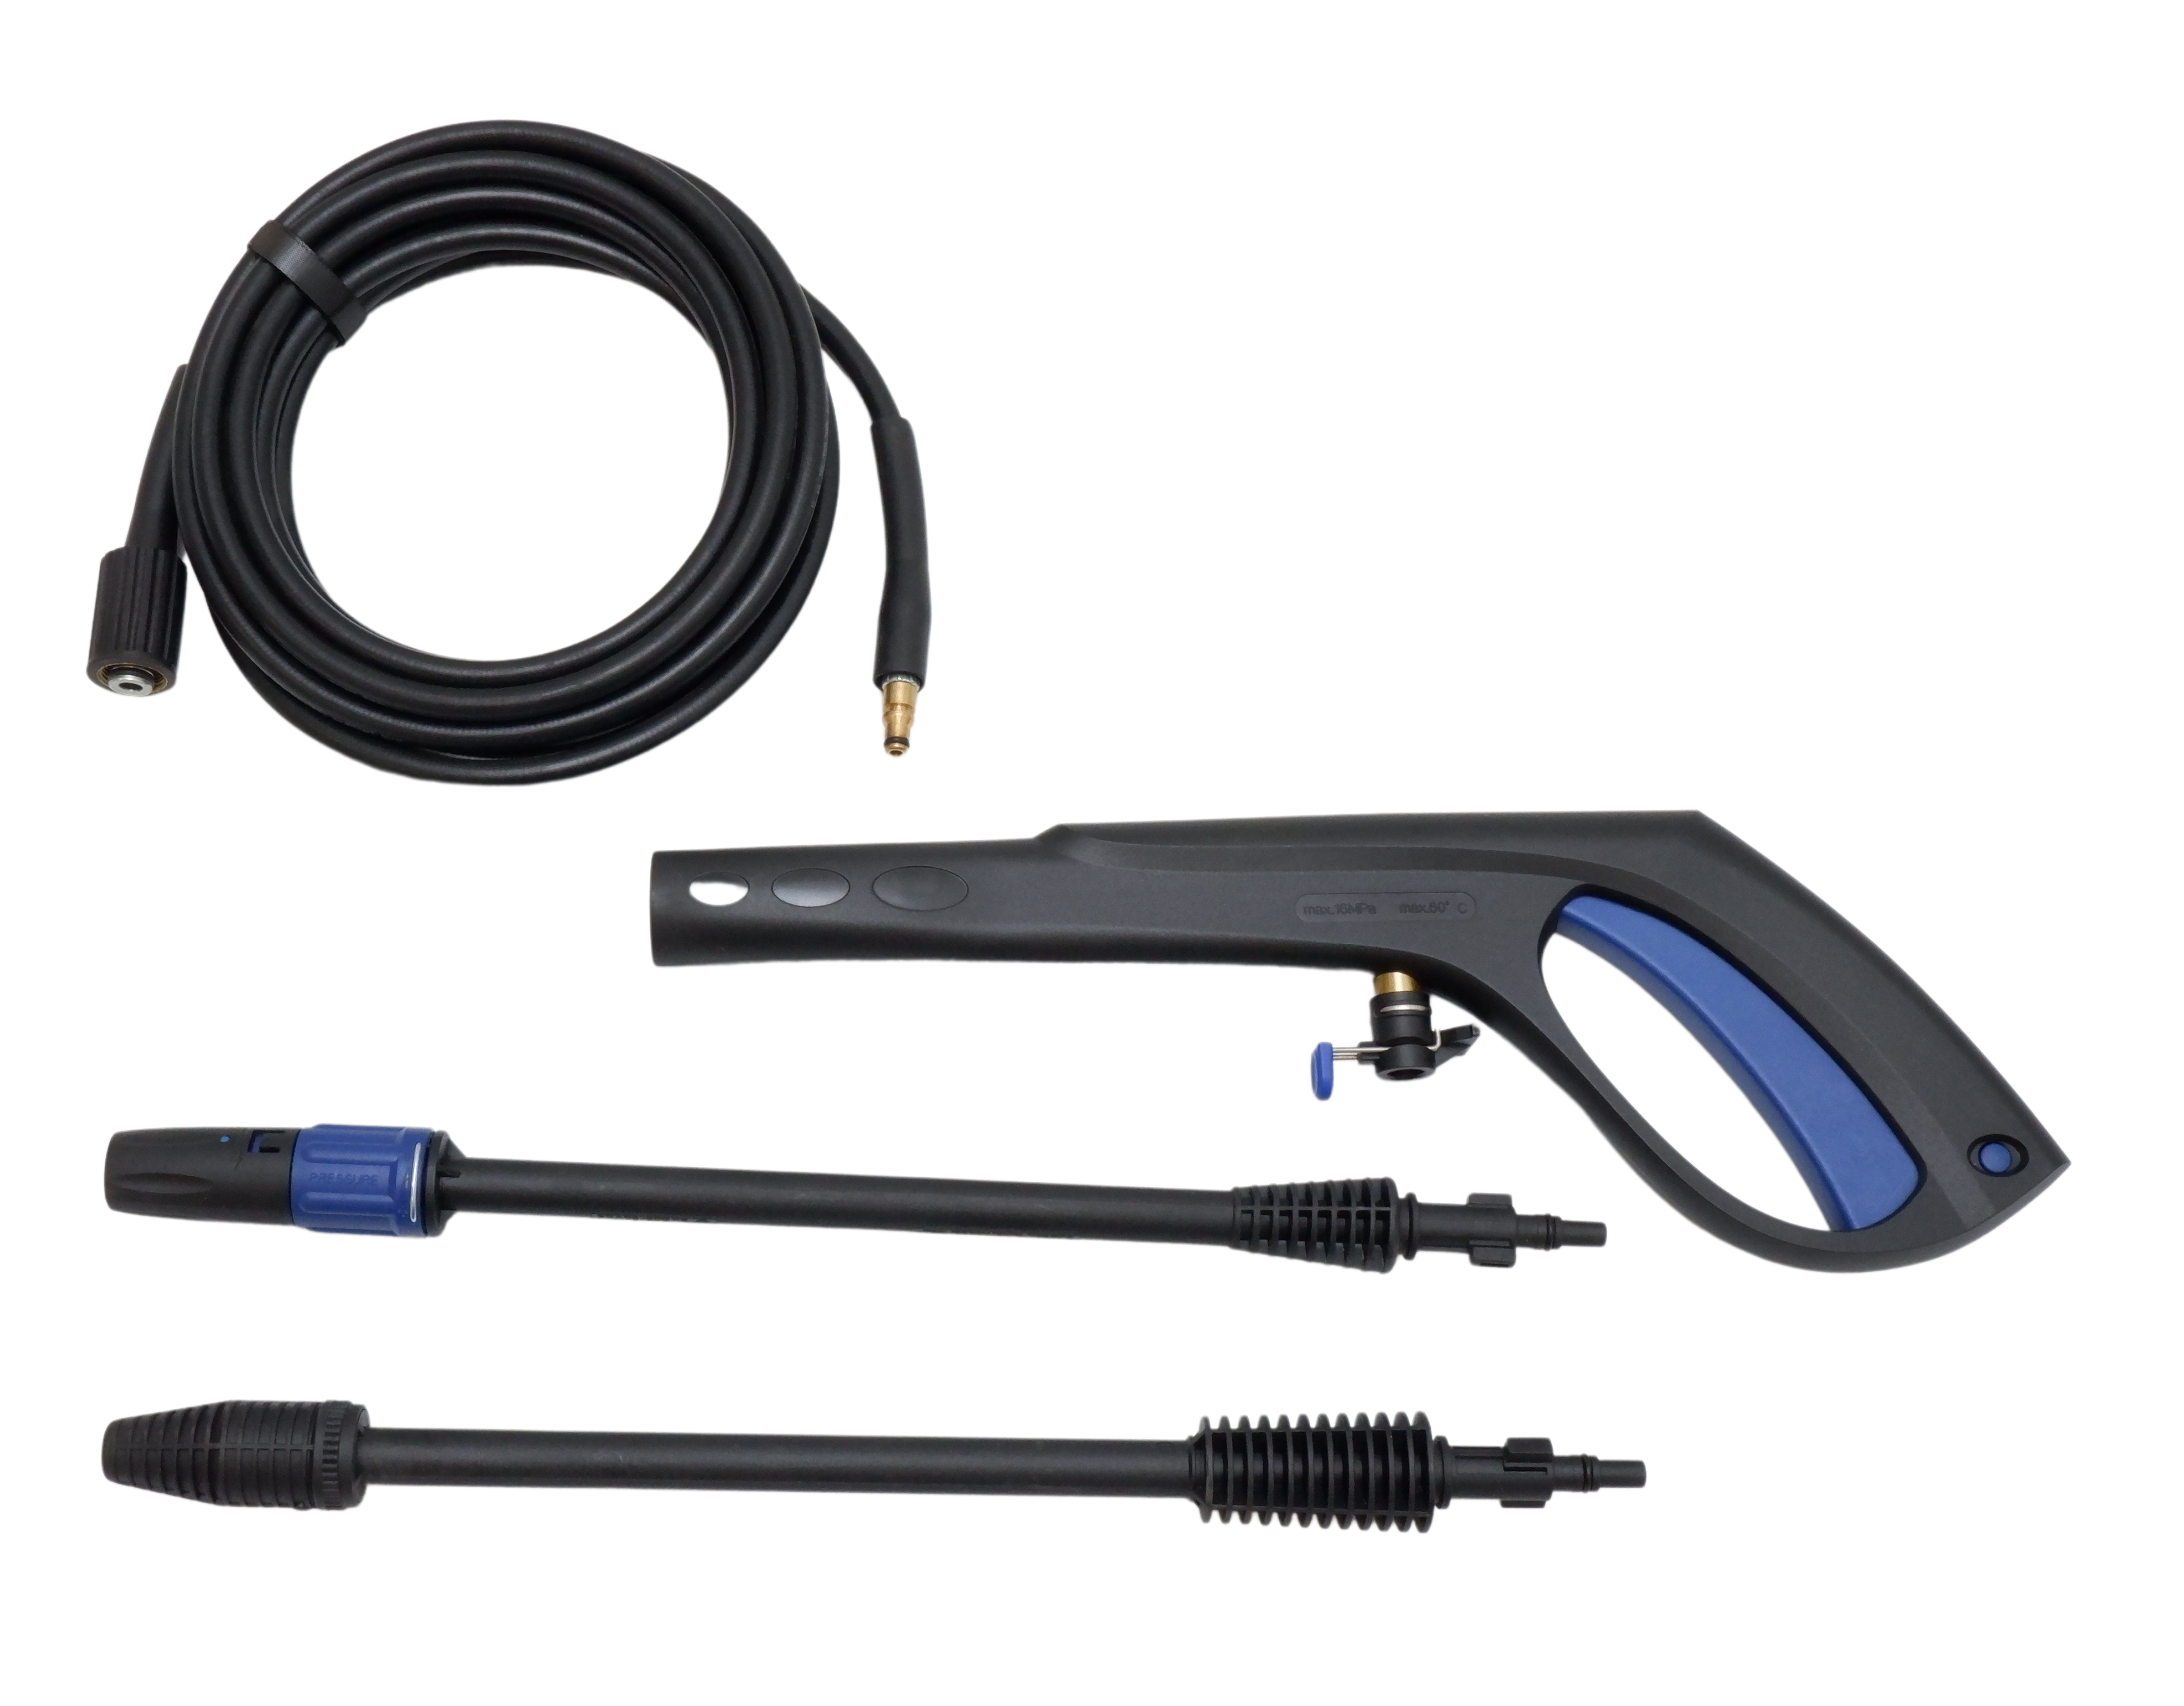 General Pipe Cleaners SWA-1000 Spray Wand Kit for JM-1000 Jetter